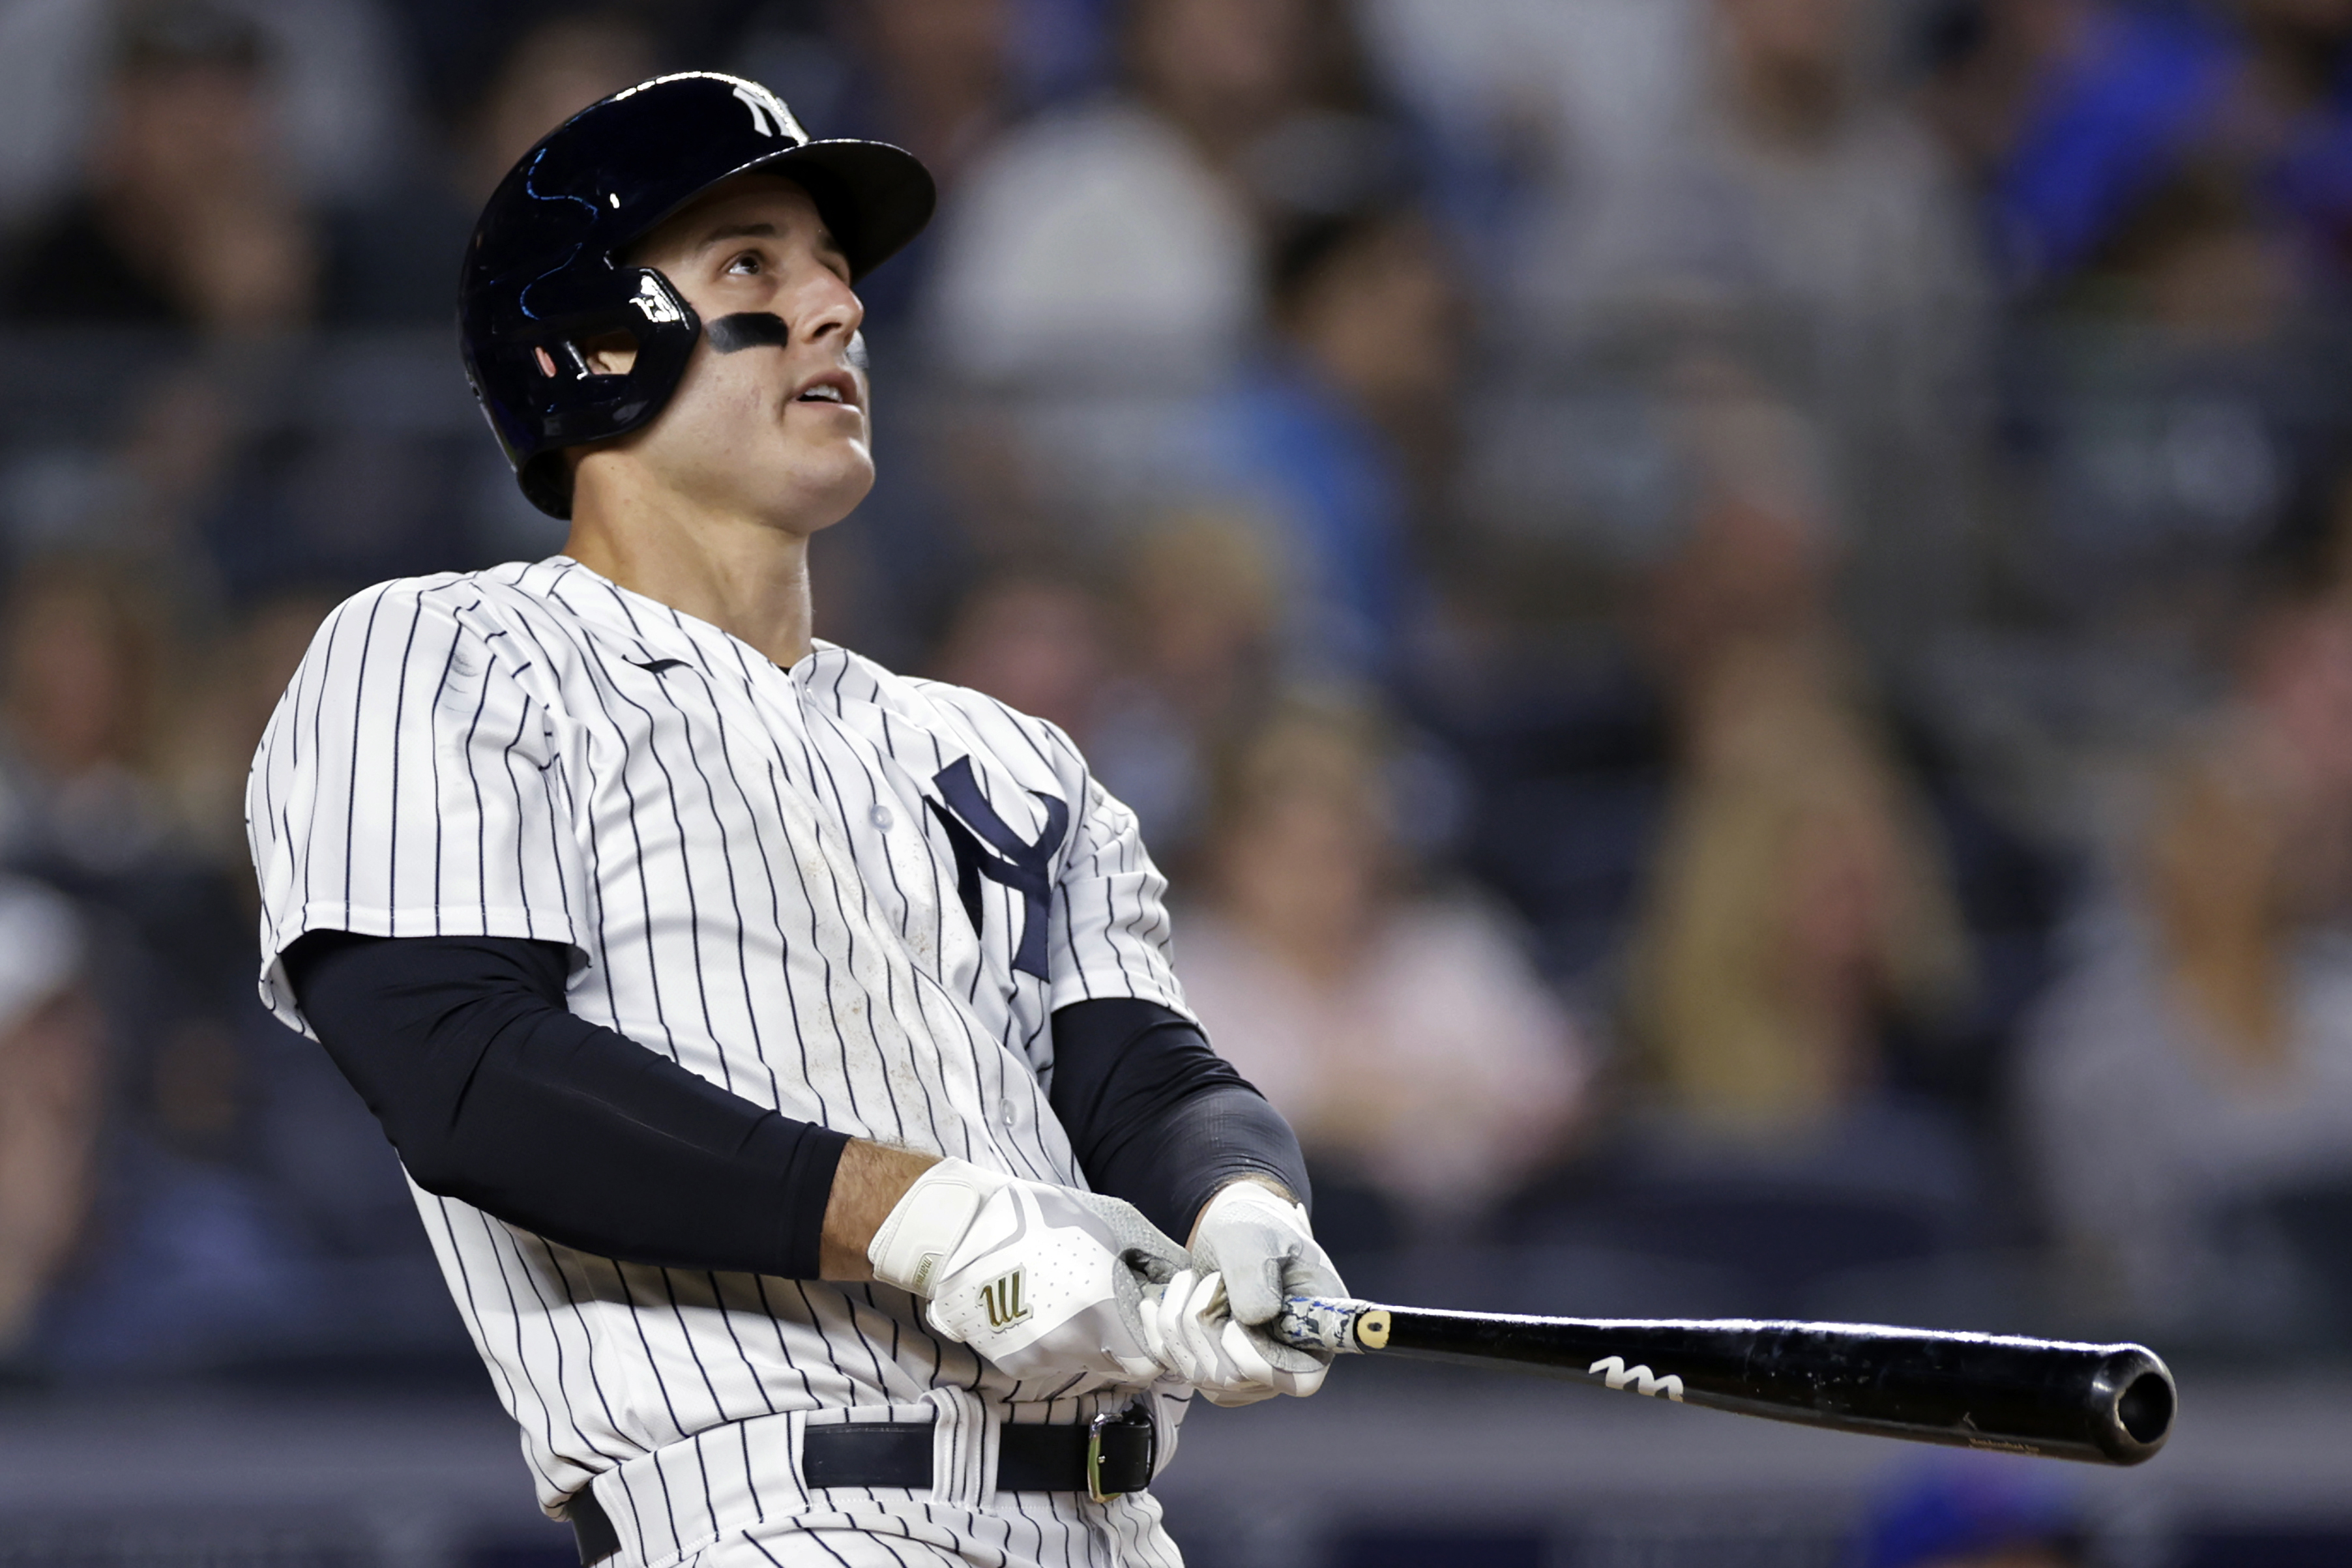 Yankees Rookie Aaron Judge Has History to Overcome: His Height - WSJ